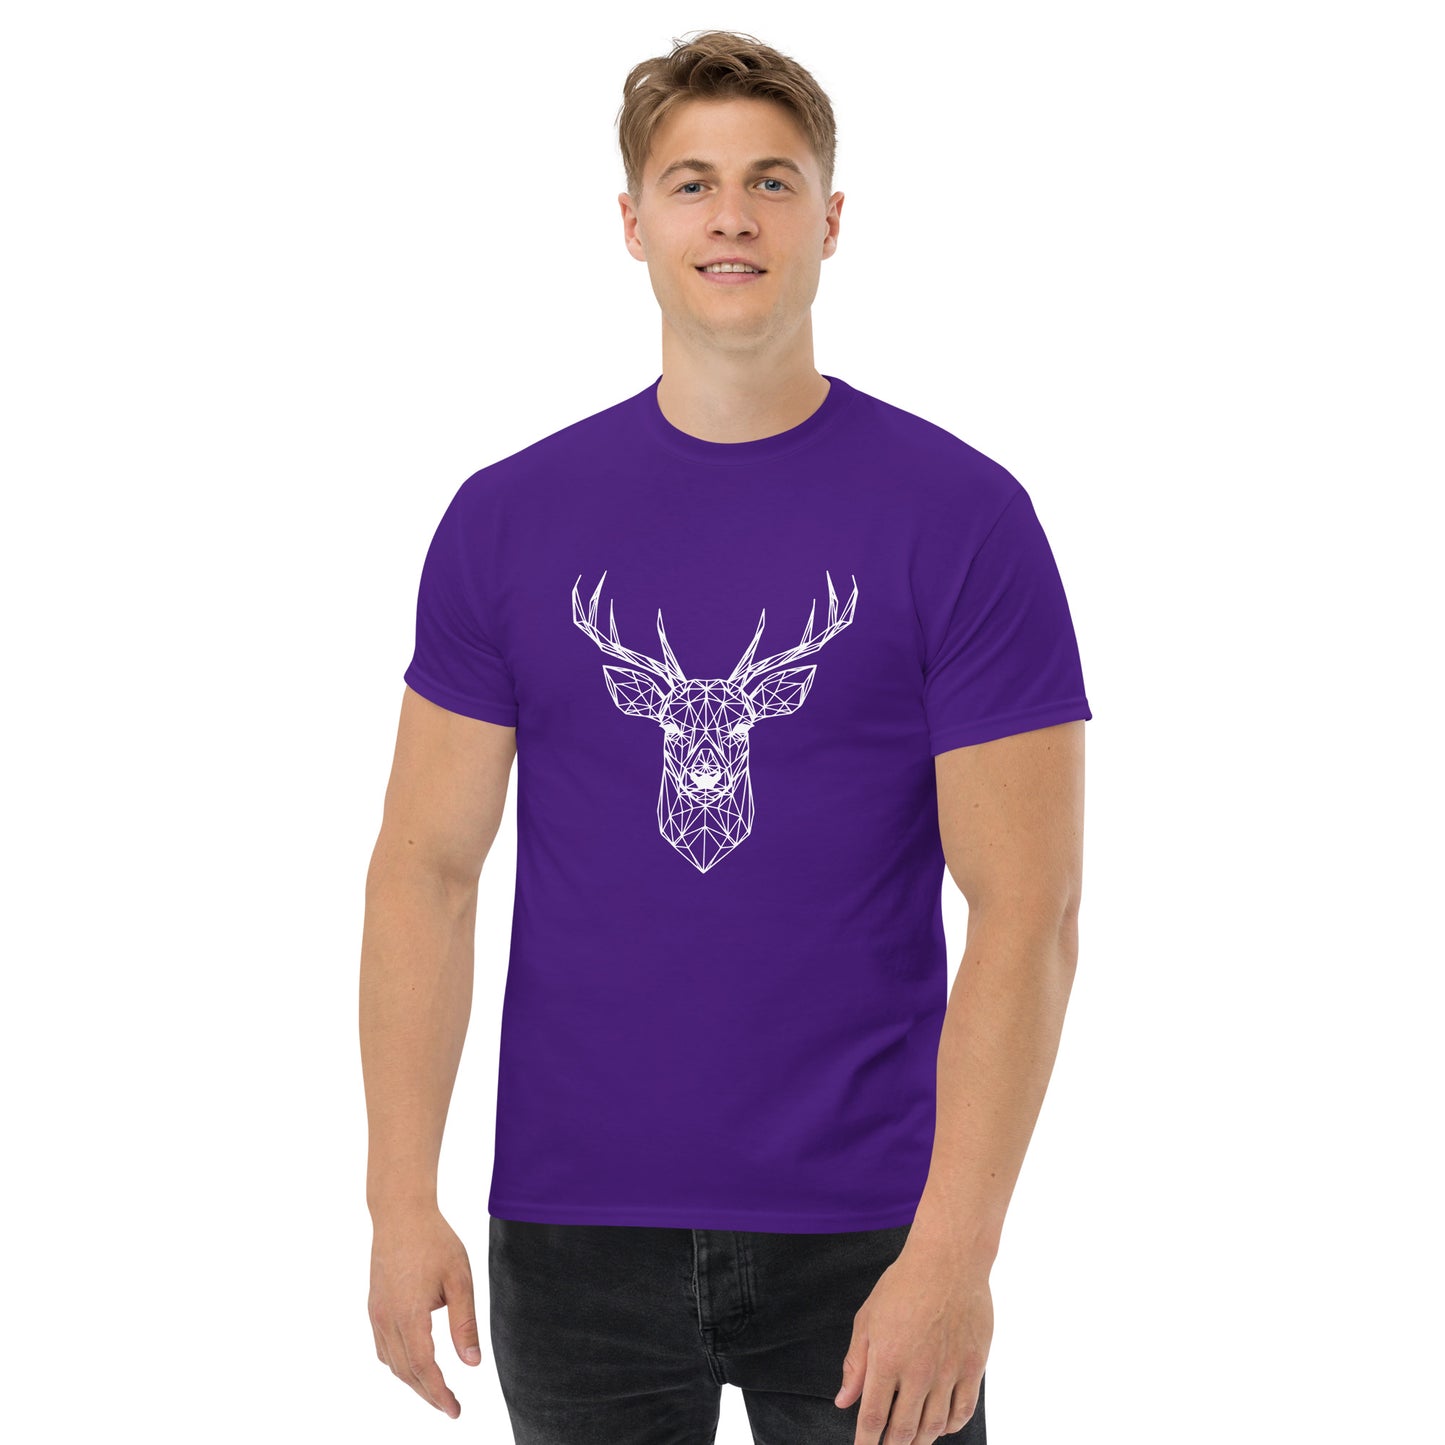 Men's classic T-Shirt with Deer Pattern